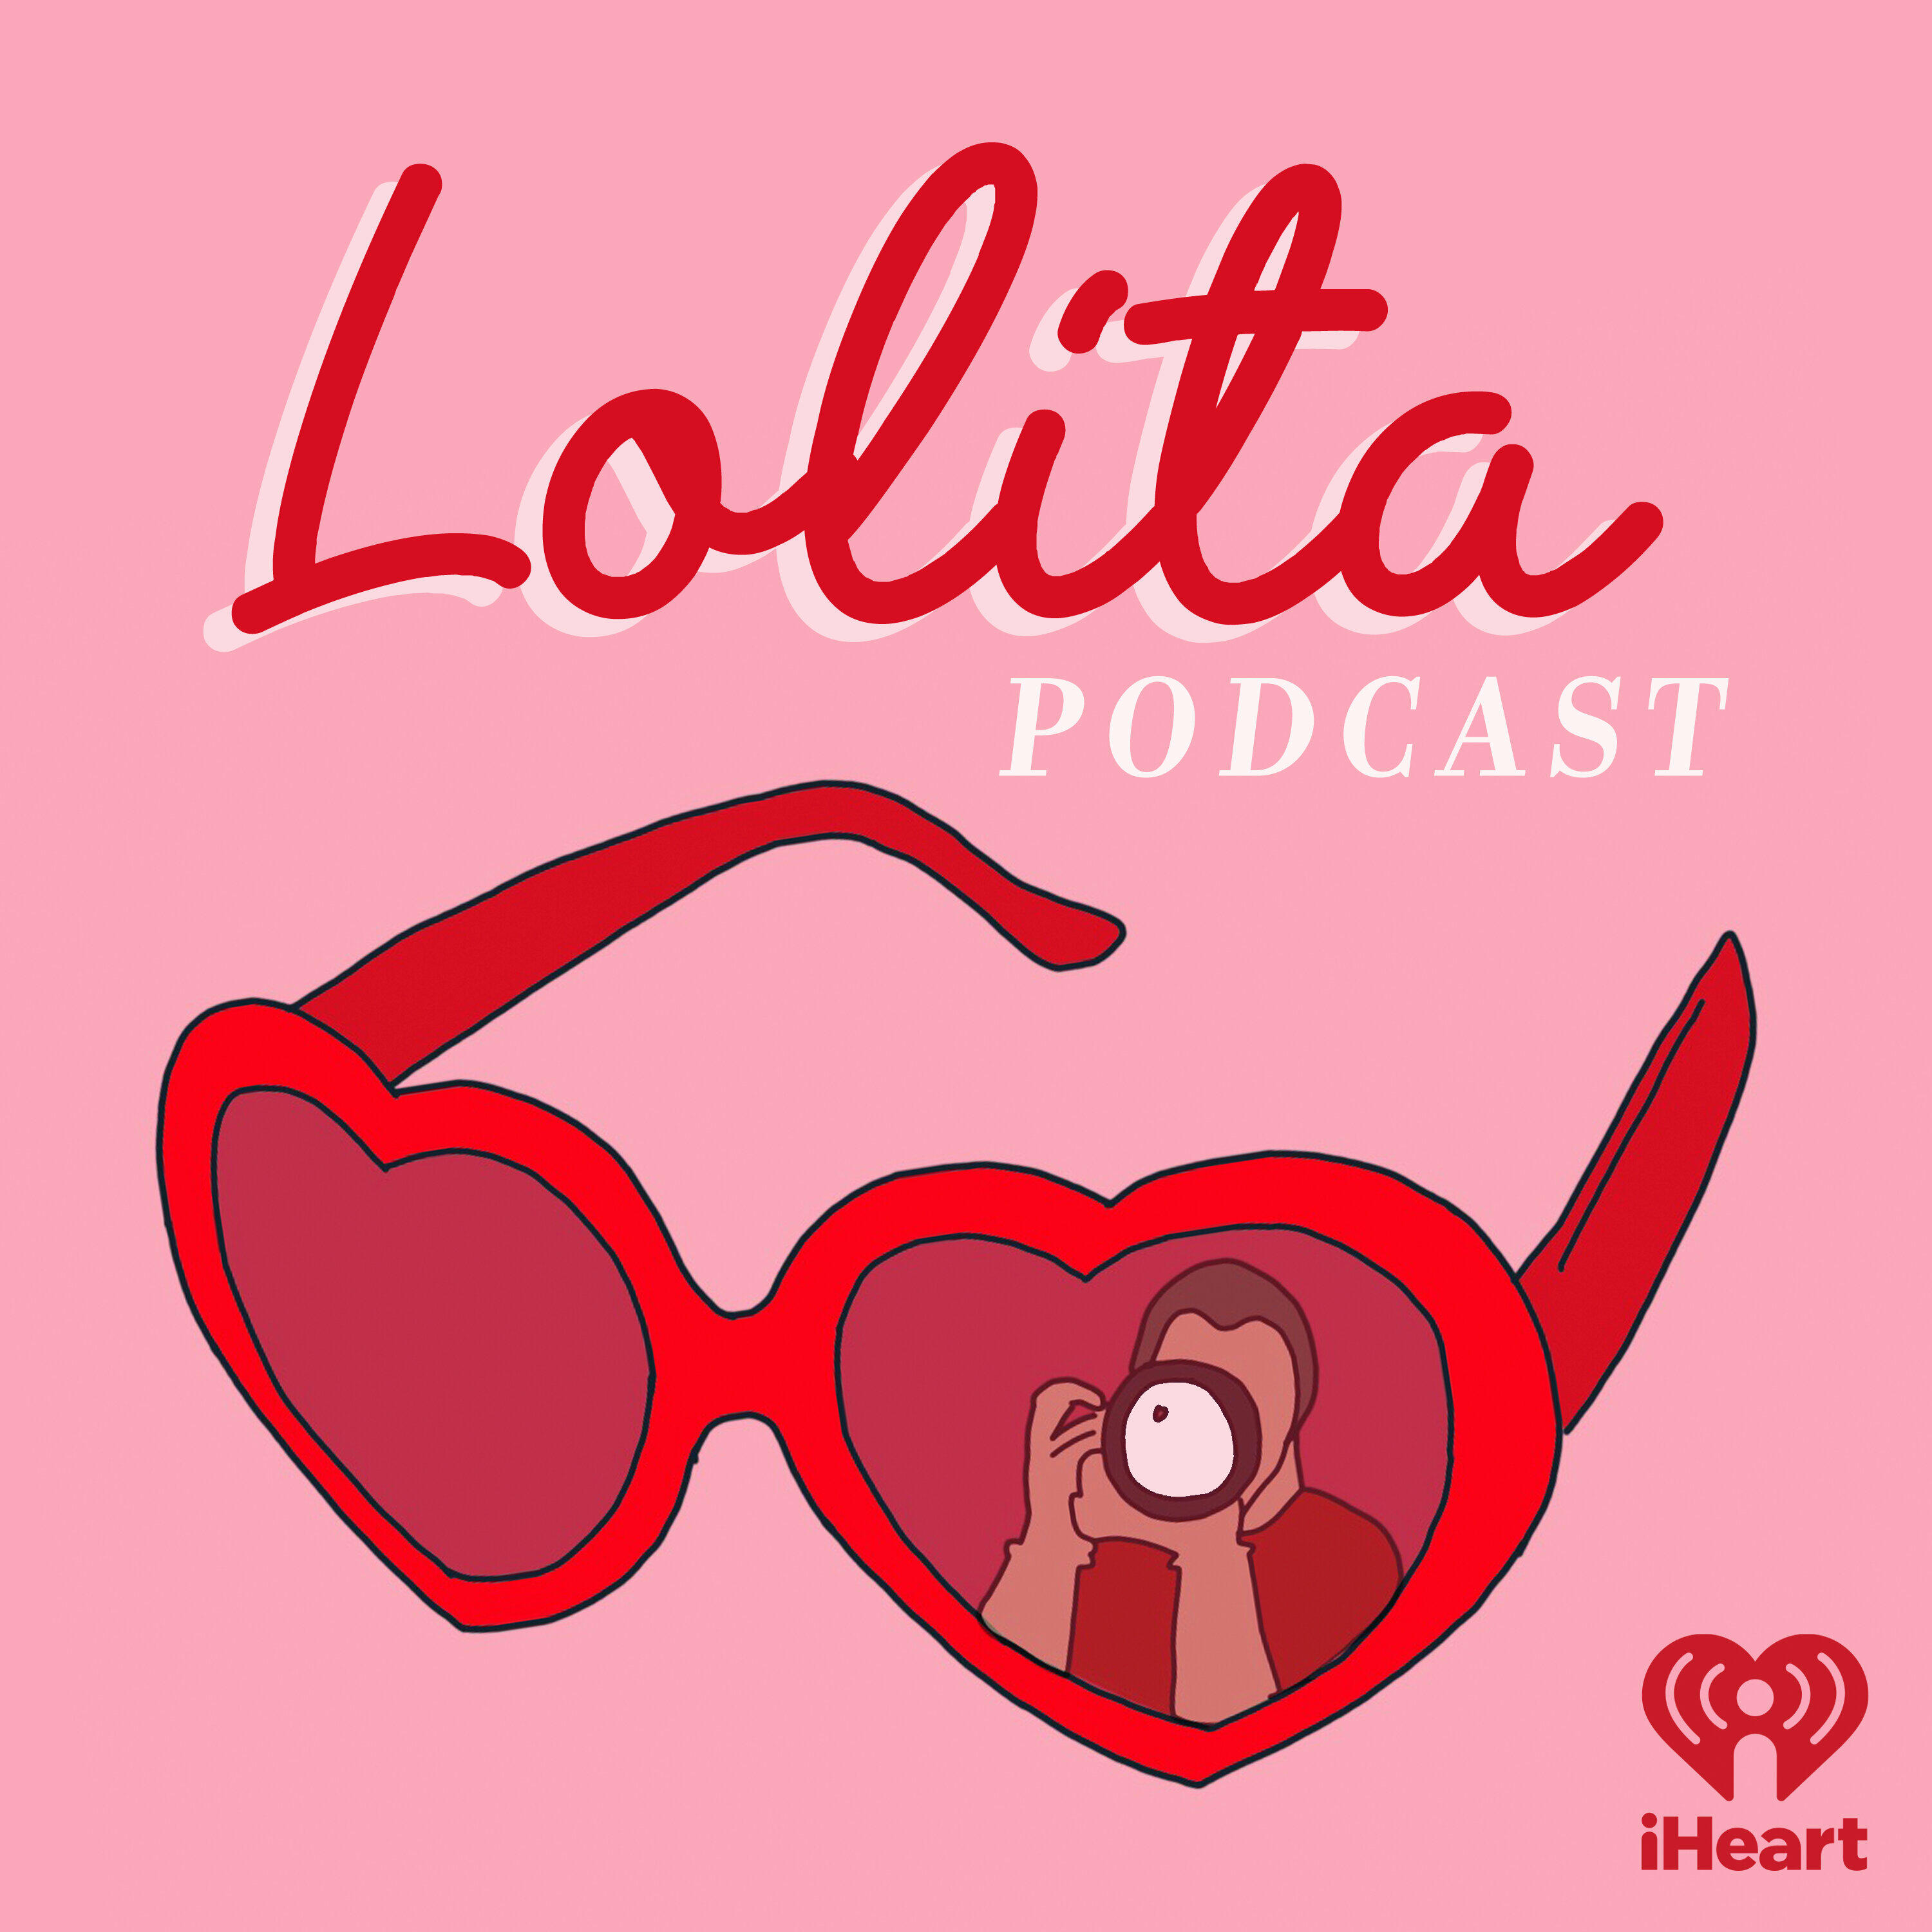 The cover art for Lolita Podcast. On a bubblegum pink background, there is an illustration of red heart-shaped sunglasses. In the reflection of one of the lenses is a figure holding a camera, as if to suggest the person is capturing the glasses for a film. The podcast's title is written in red and white cursive handwriting font.